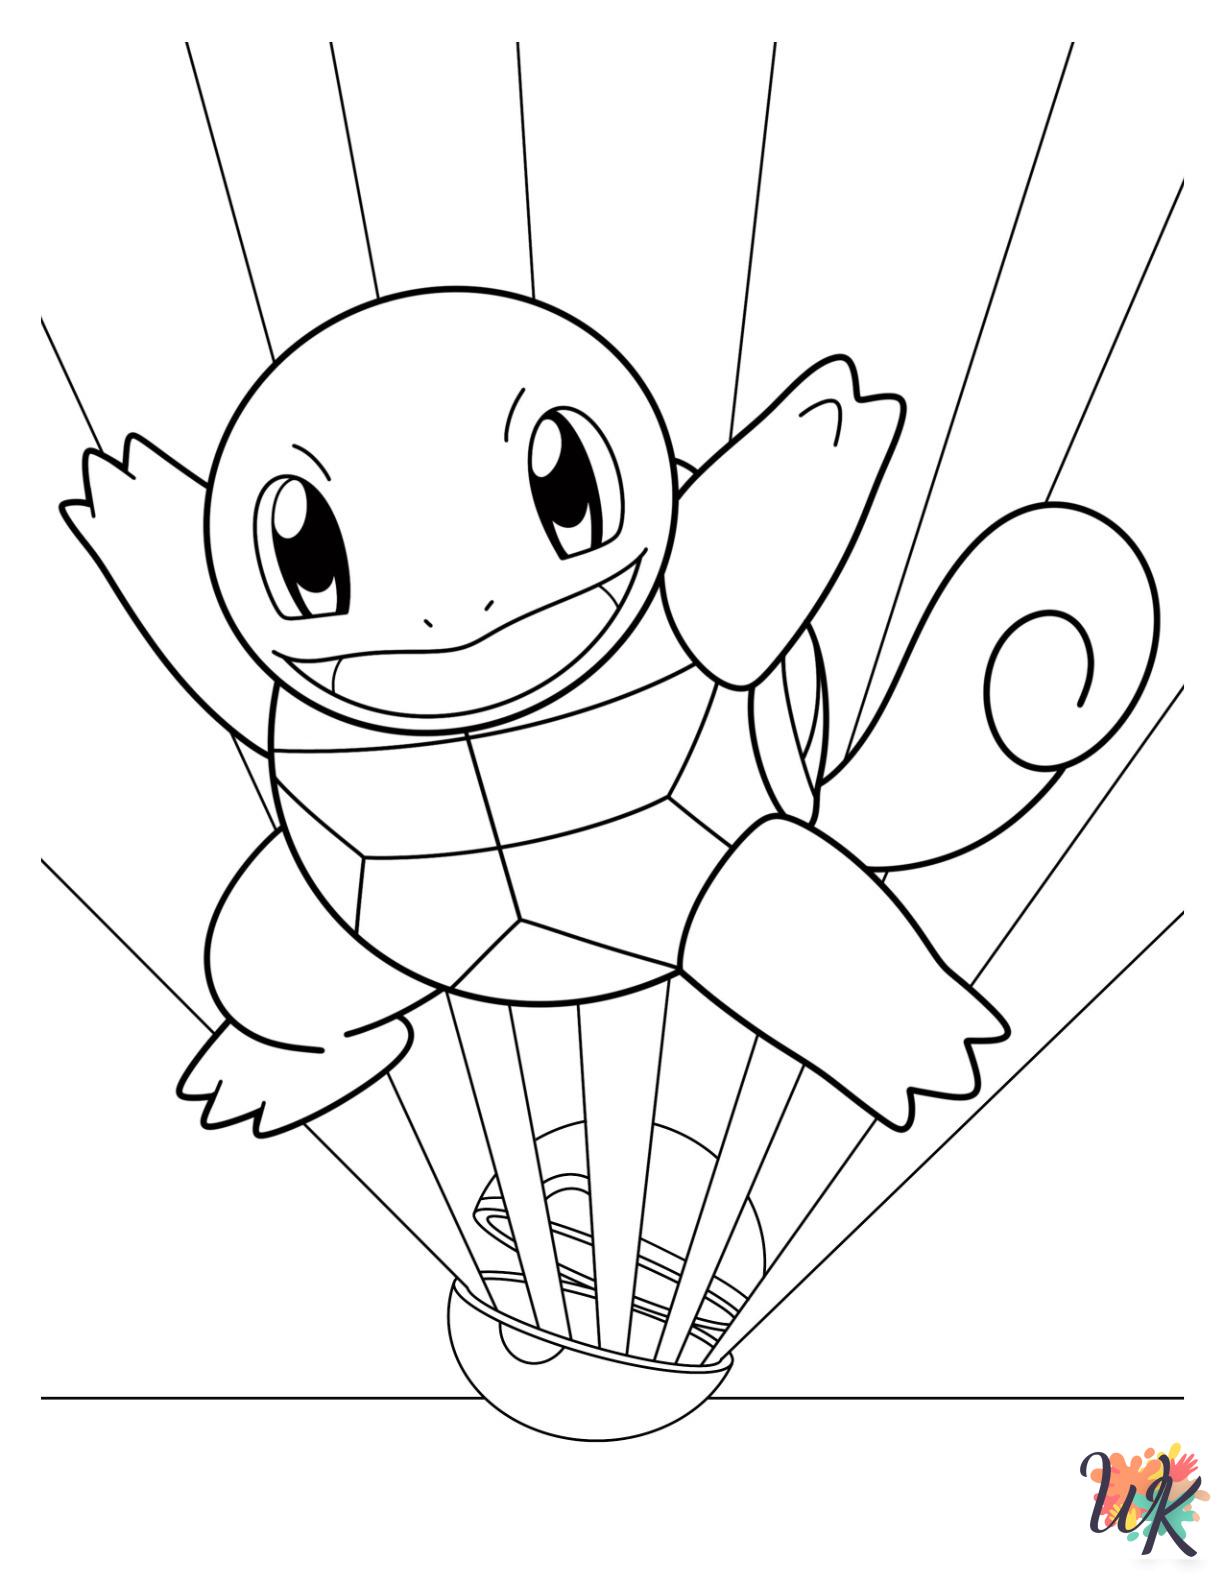 Pokeball coloring pages printable free